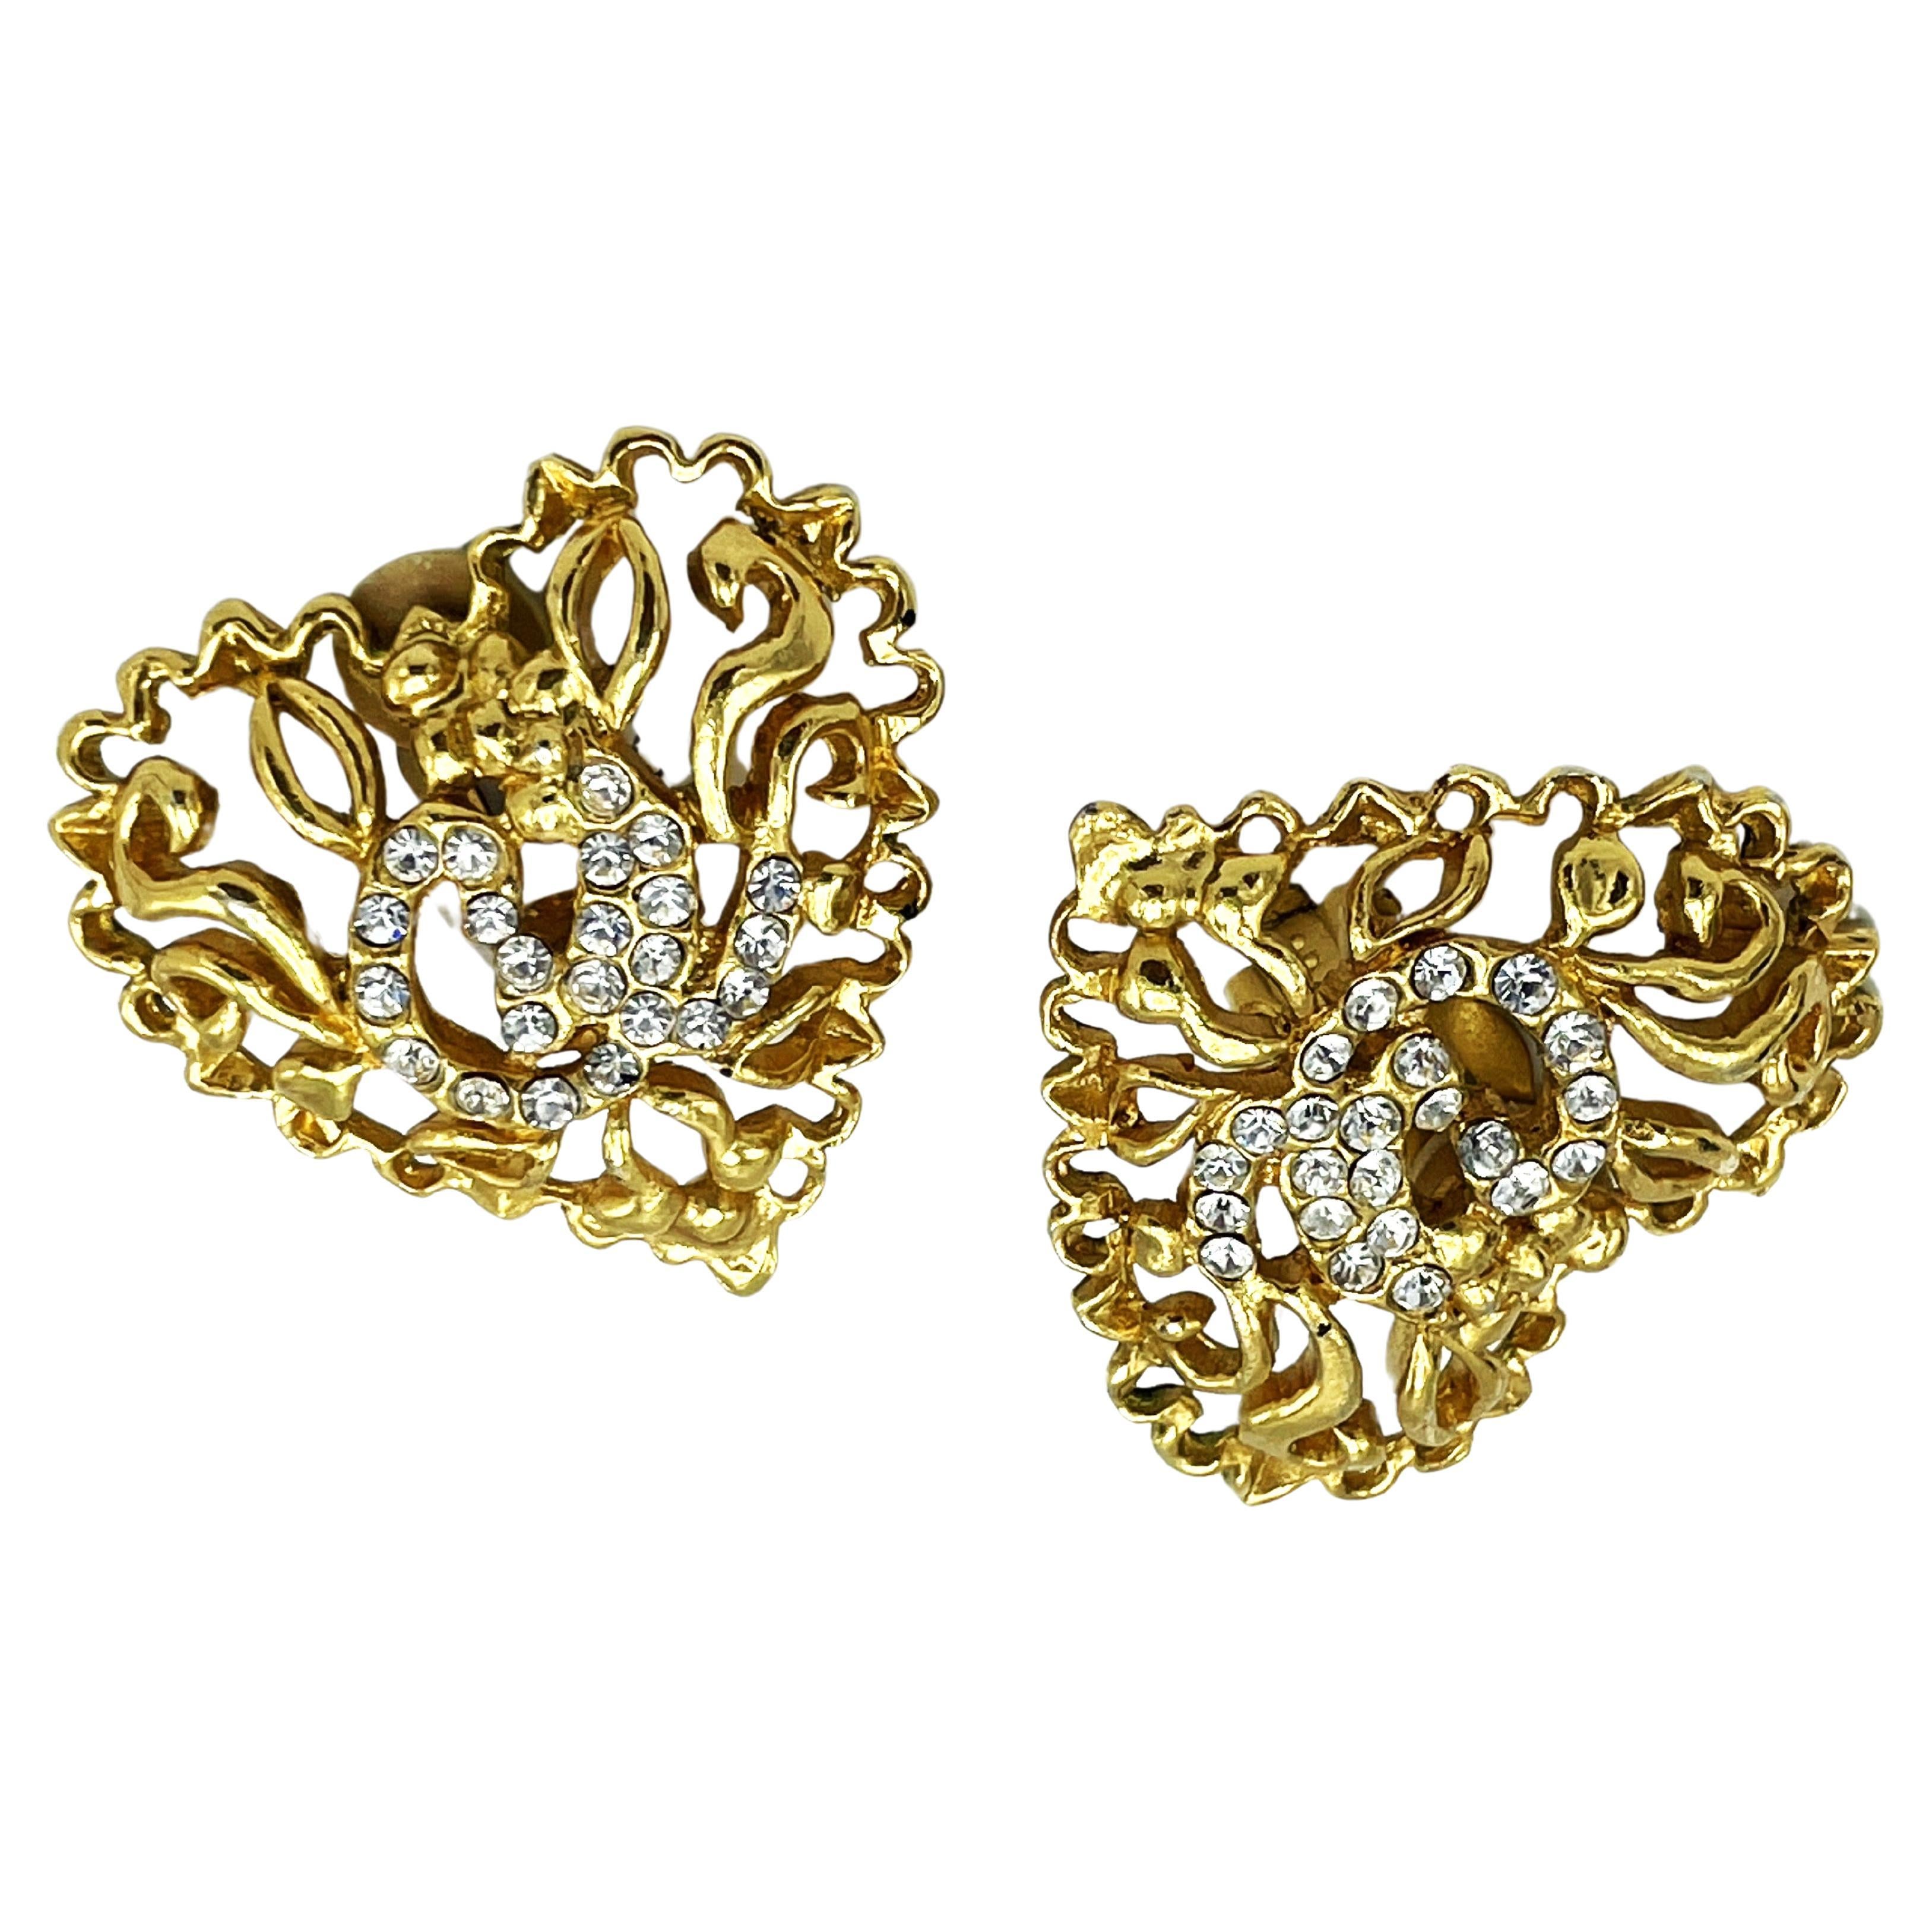 Clip-on earrings in the shape of an openwork heart, with Lacroix signature in rhinestones in the middle.

Dimensions: 
Width  4 cm  x H 4 cm 
Futures:
- Original Christian Lacroix stamp and date summer E94
- Openwork with Lacroix signature in